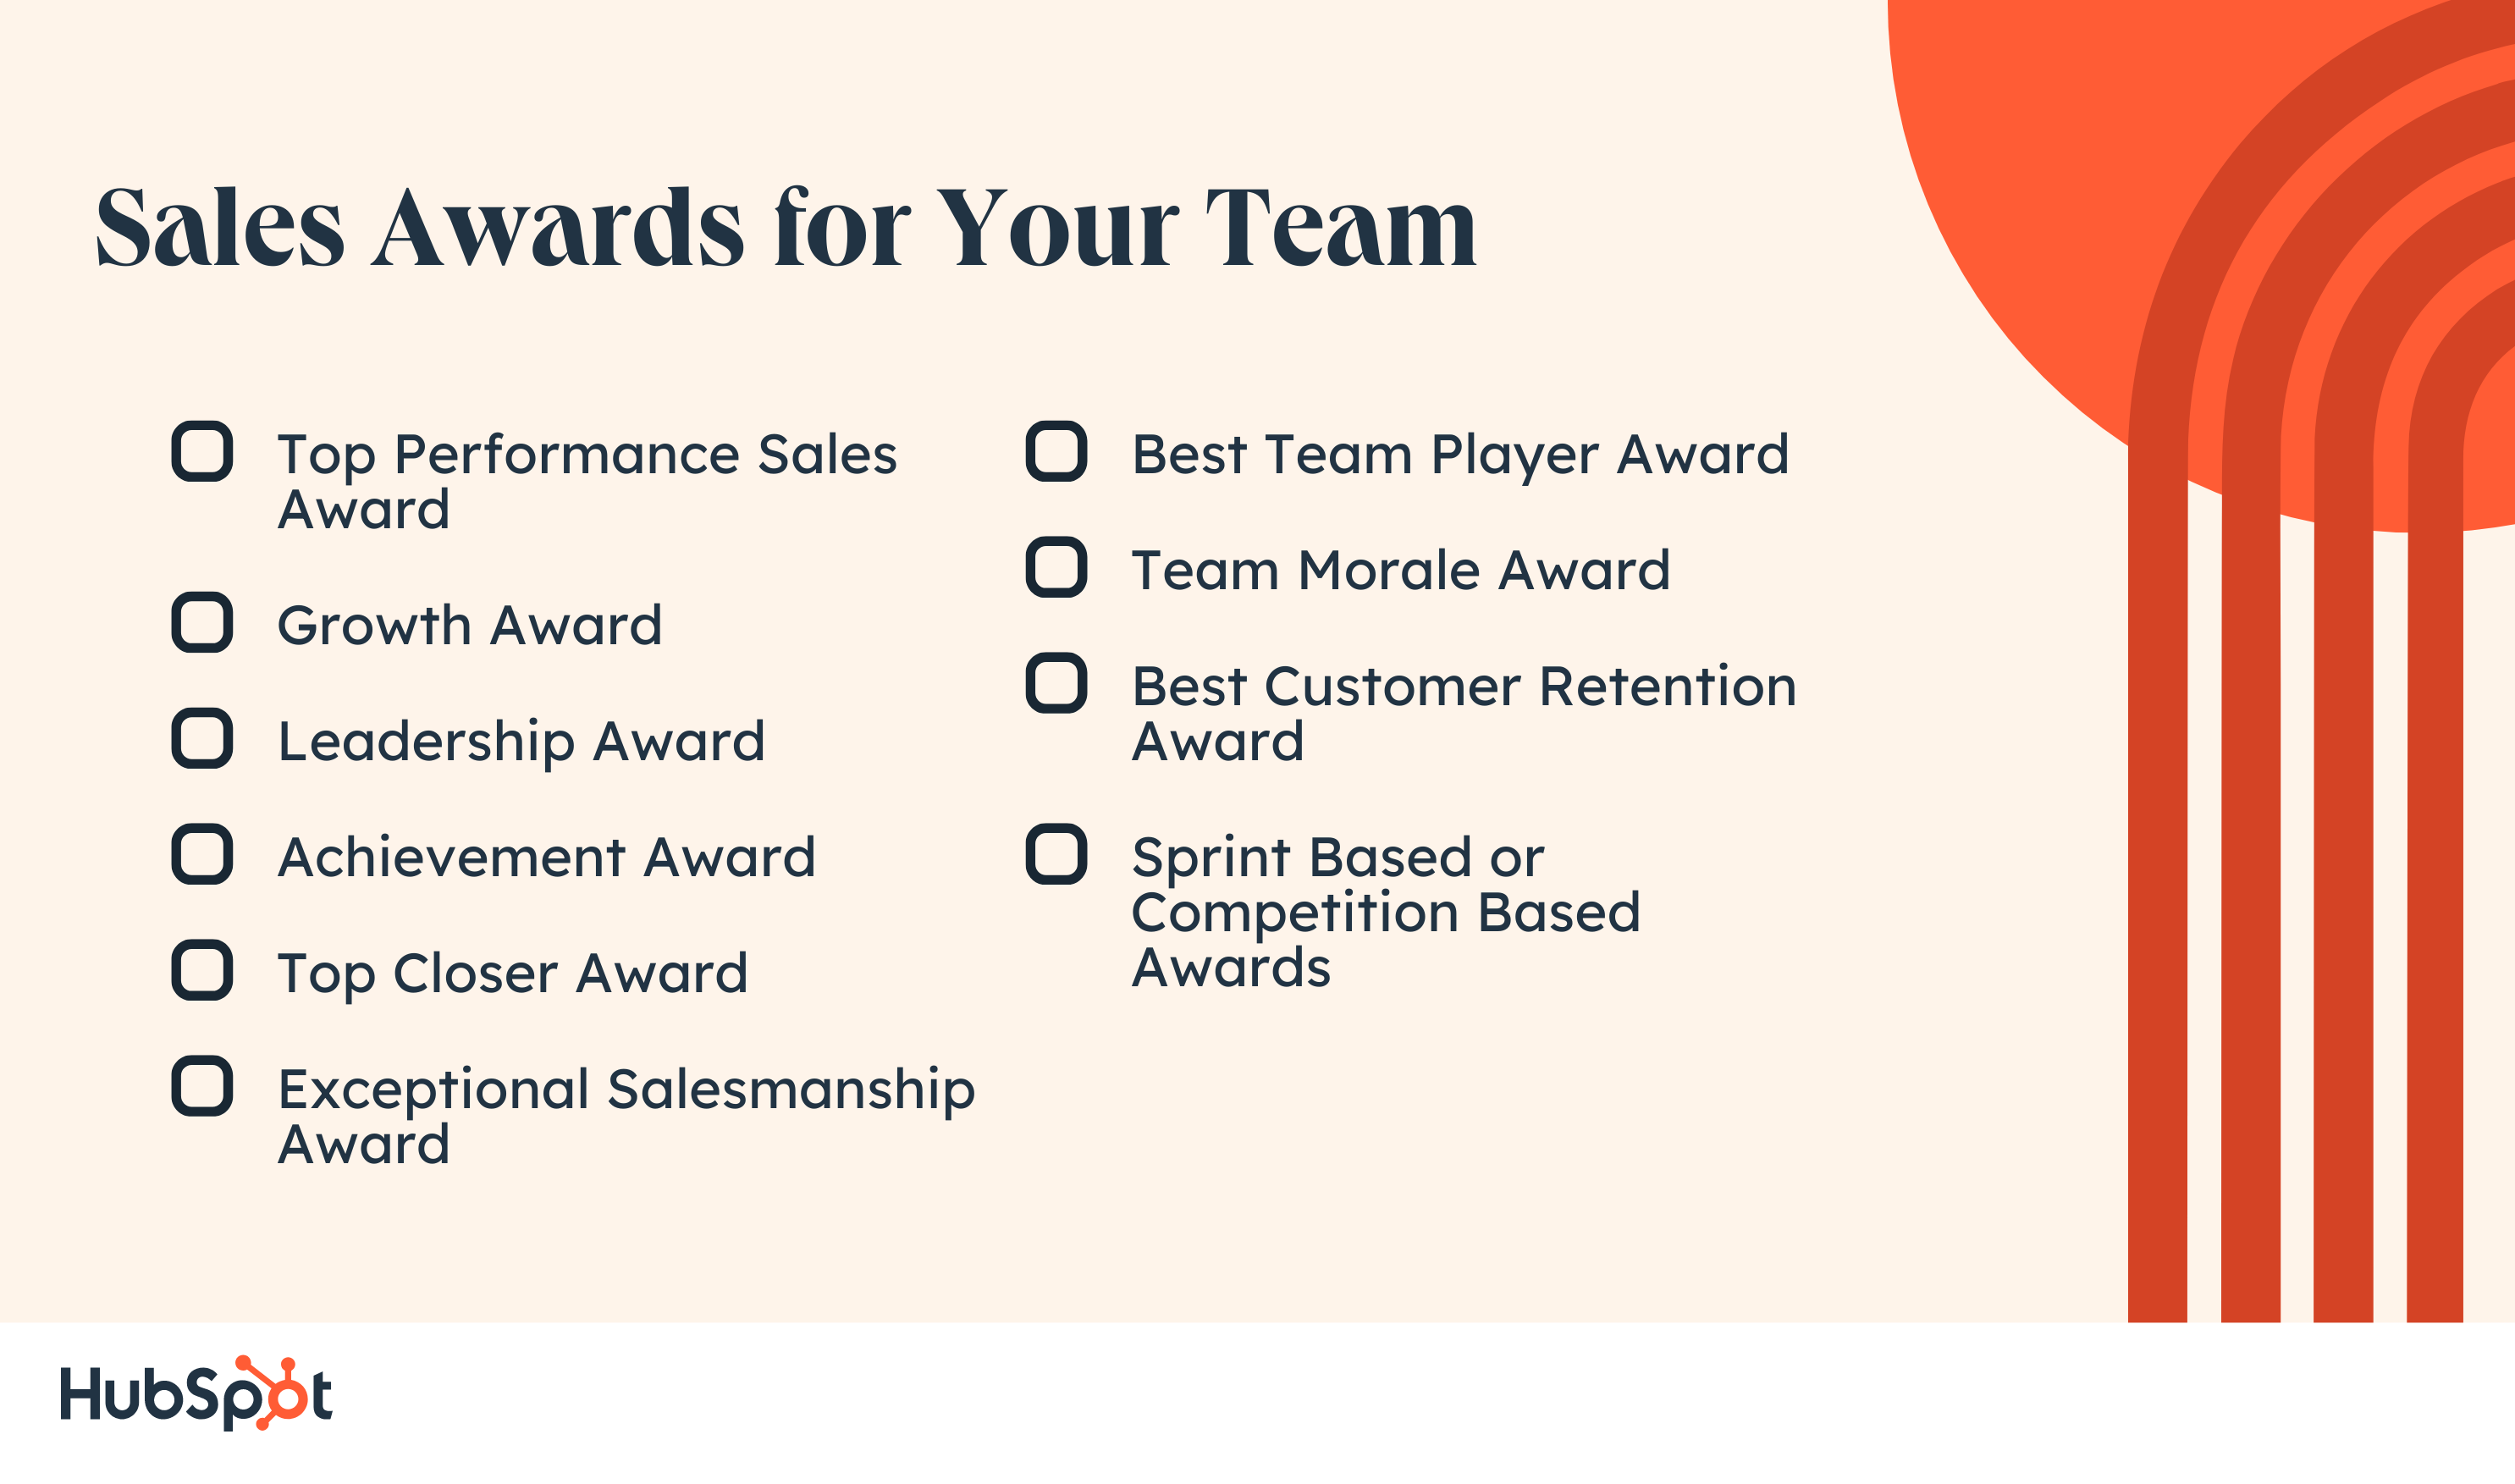 20 Sales Awards You Should Give Out to Fire Up Your Sales Team